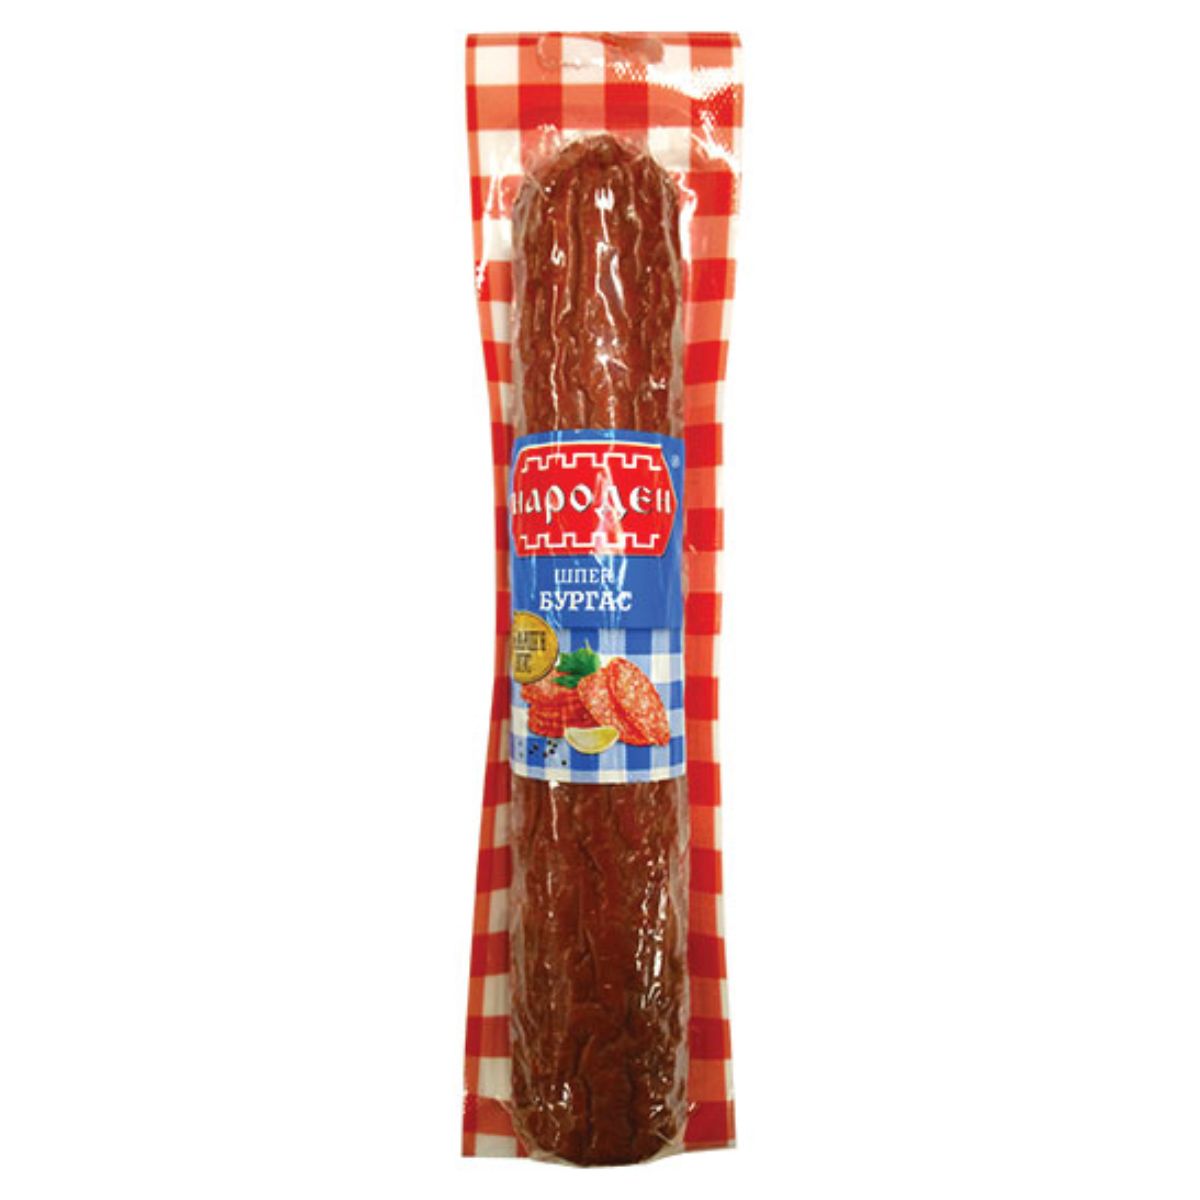 The Bella - Naroden Larded Cooked & Smoked Salami Burgas - 220g is wrapped in a red and white checkered bag.